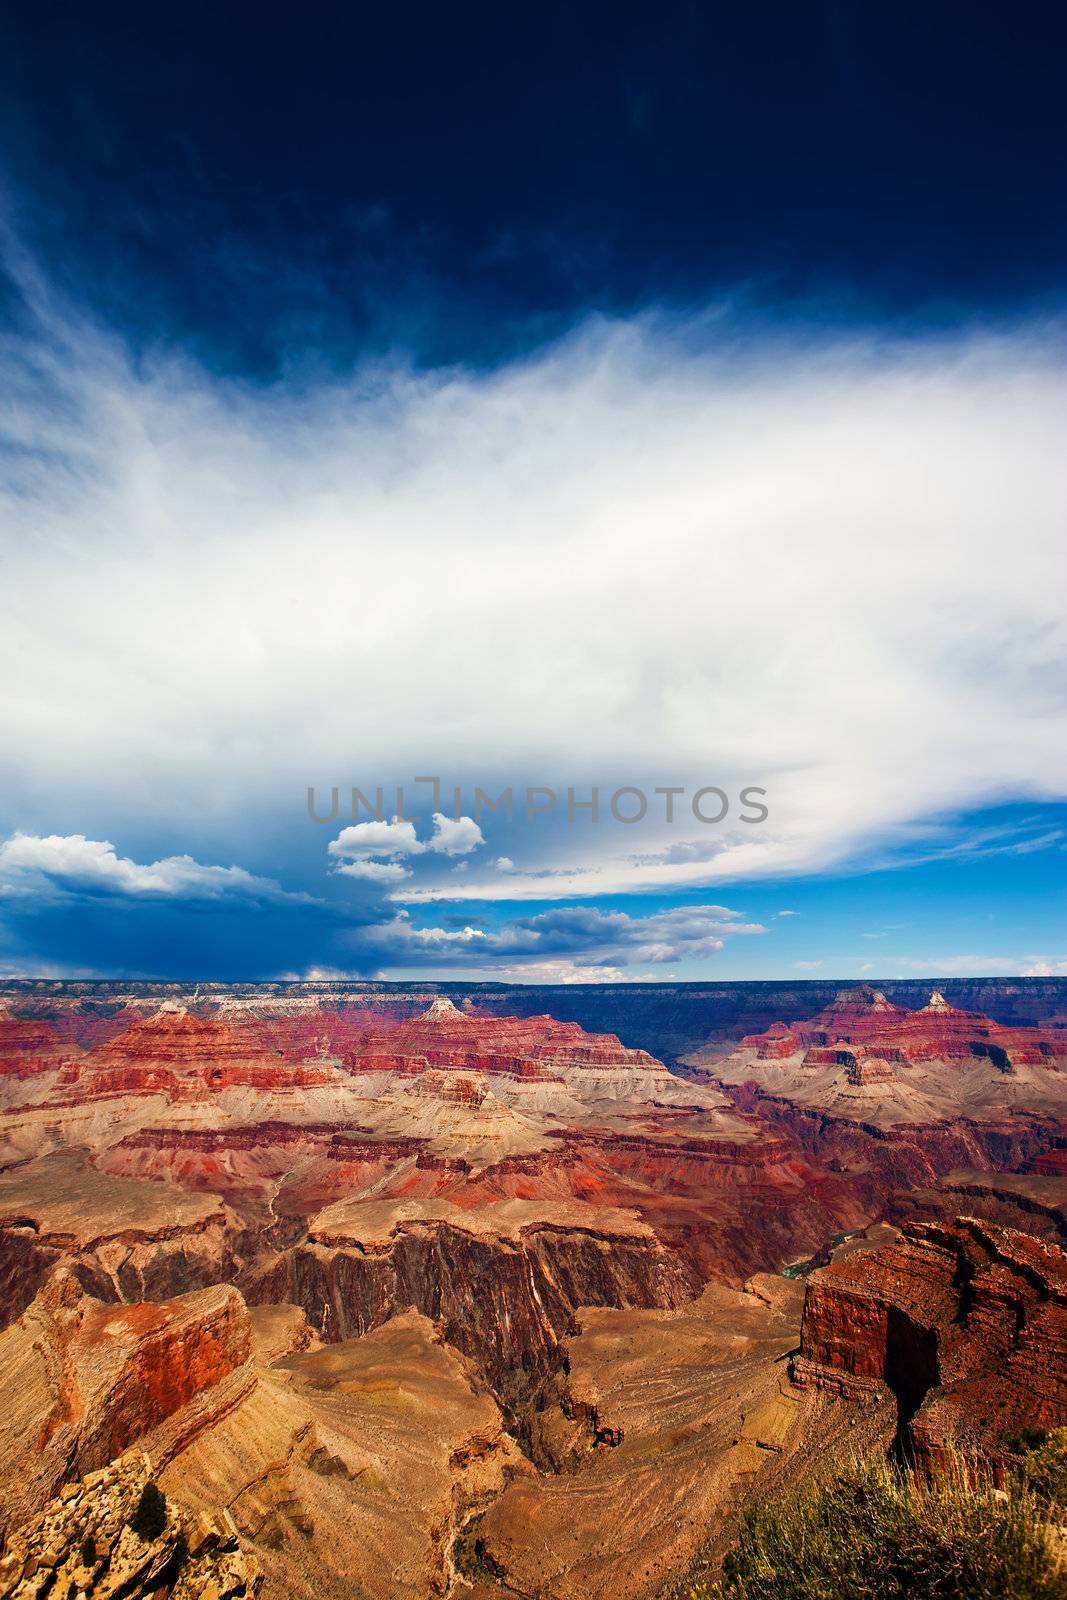 Clouds building over the North Rim of Grand Canyon